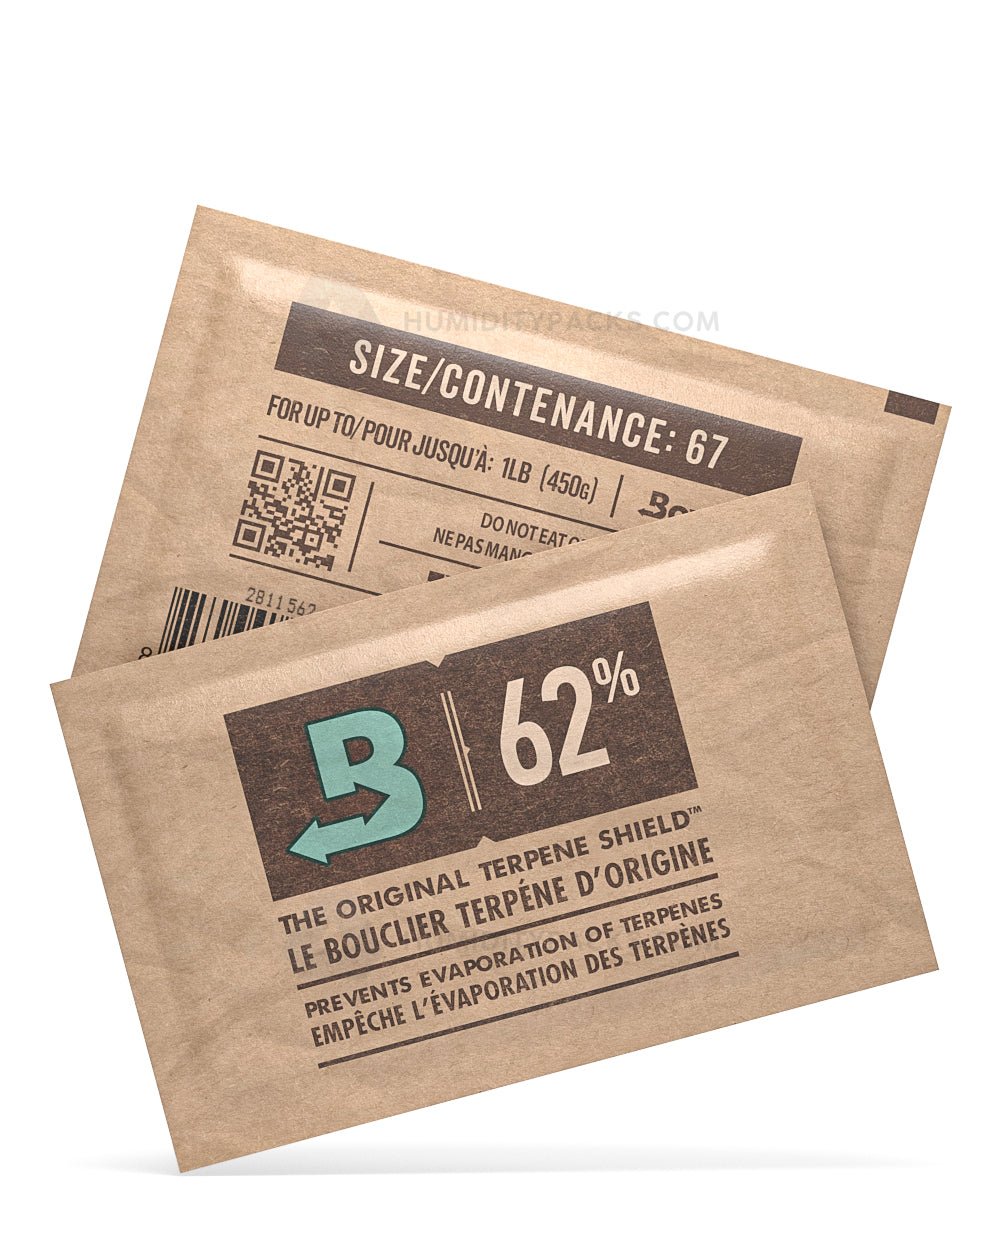 Humidity Packs: Moisture Packets for Product Preservation